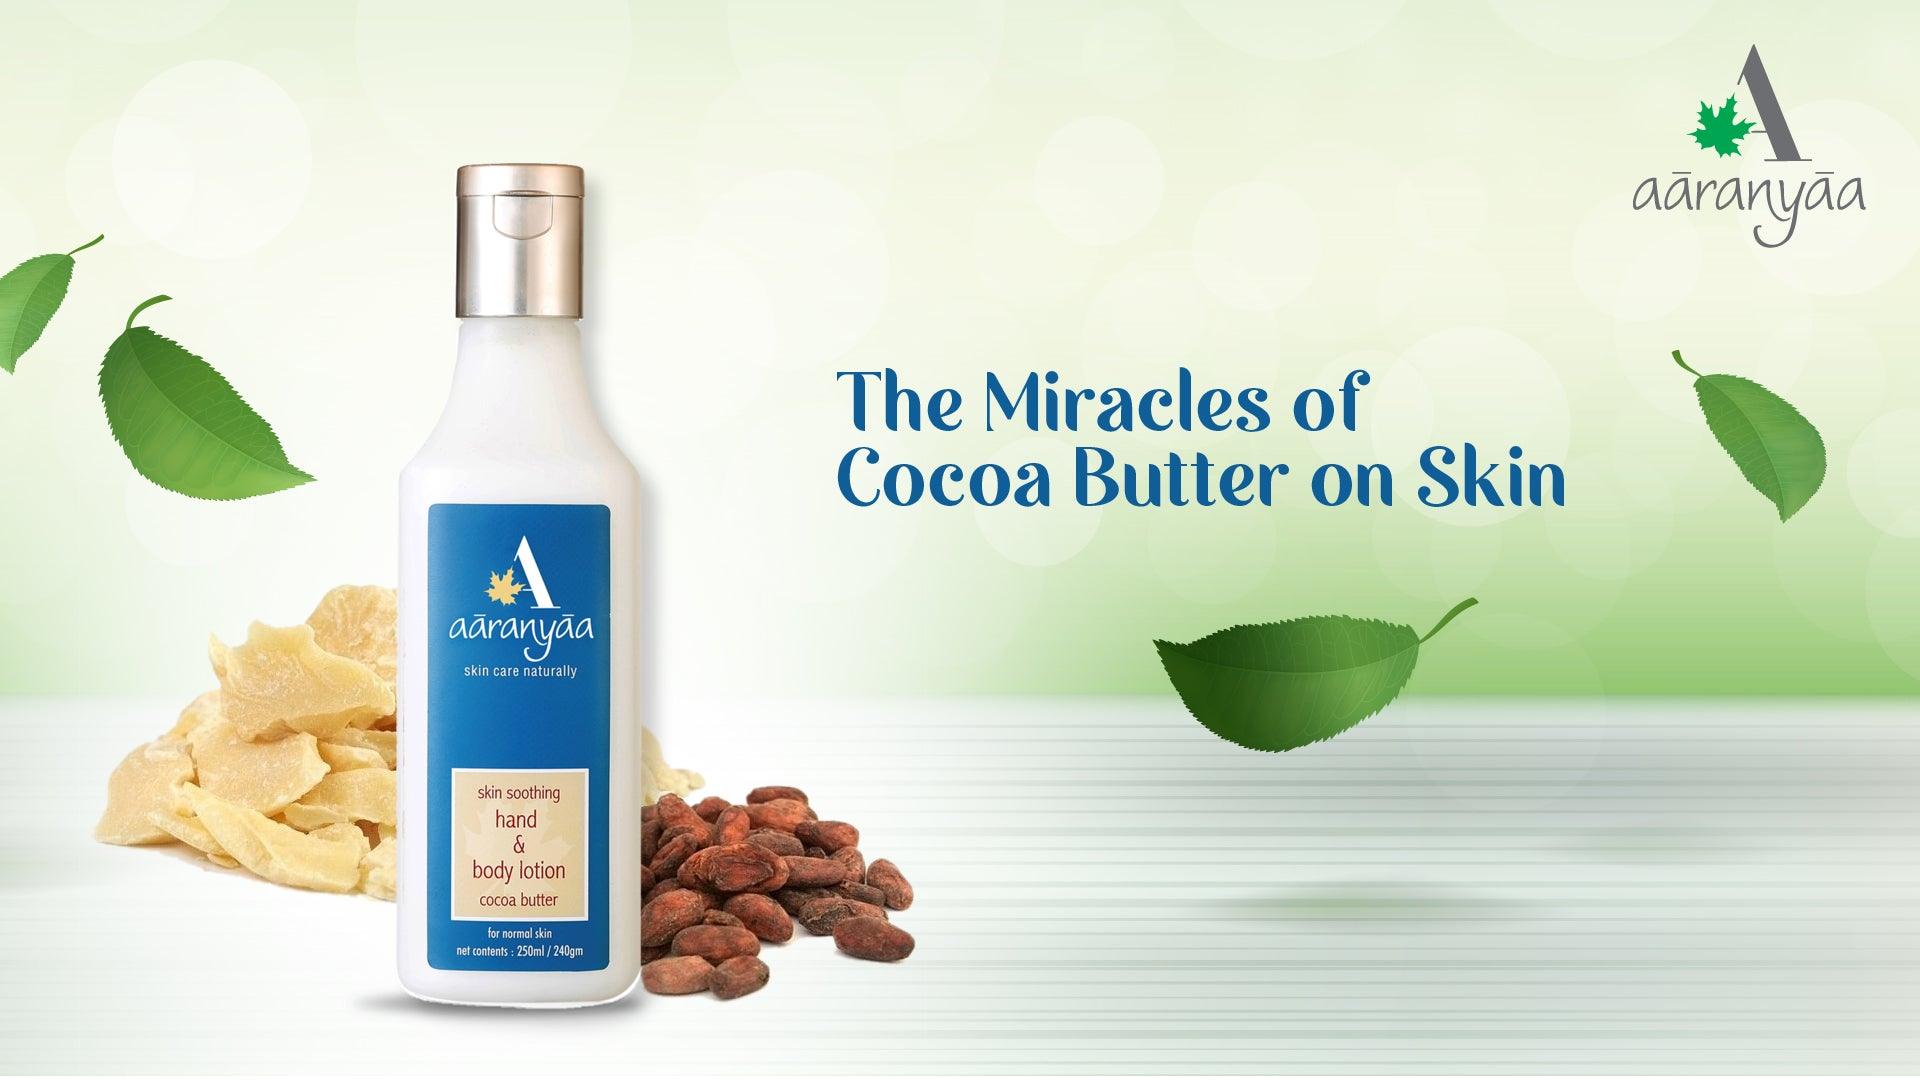 THE MIRACLES OF COCOA BUTTER ON SKIN - aaranyaa skincare